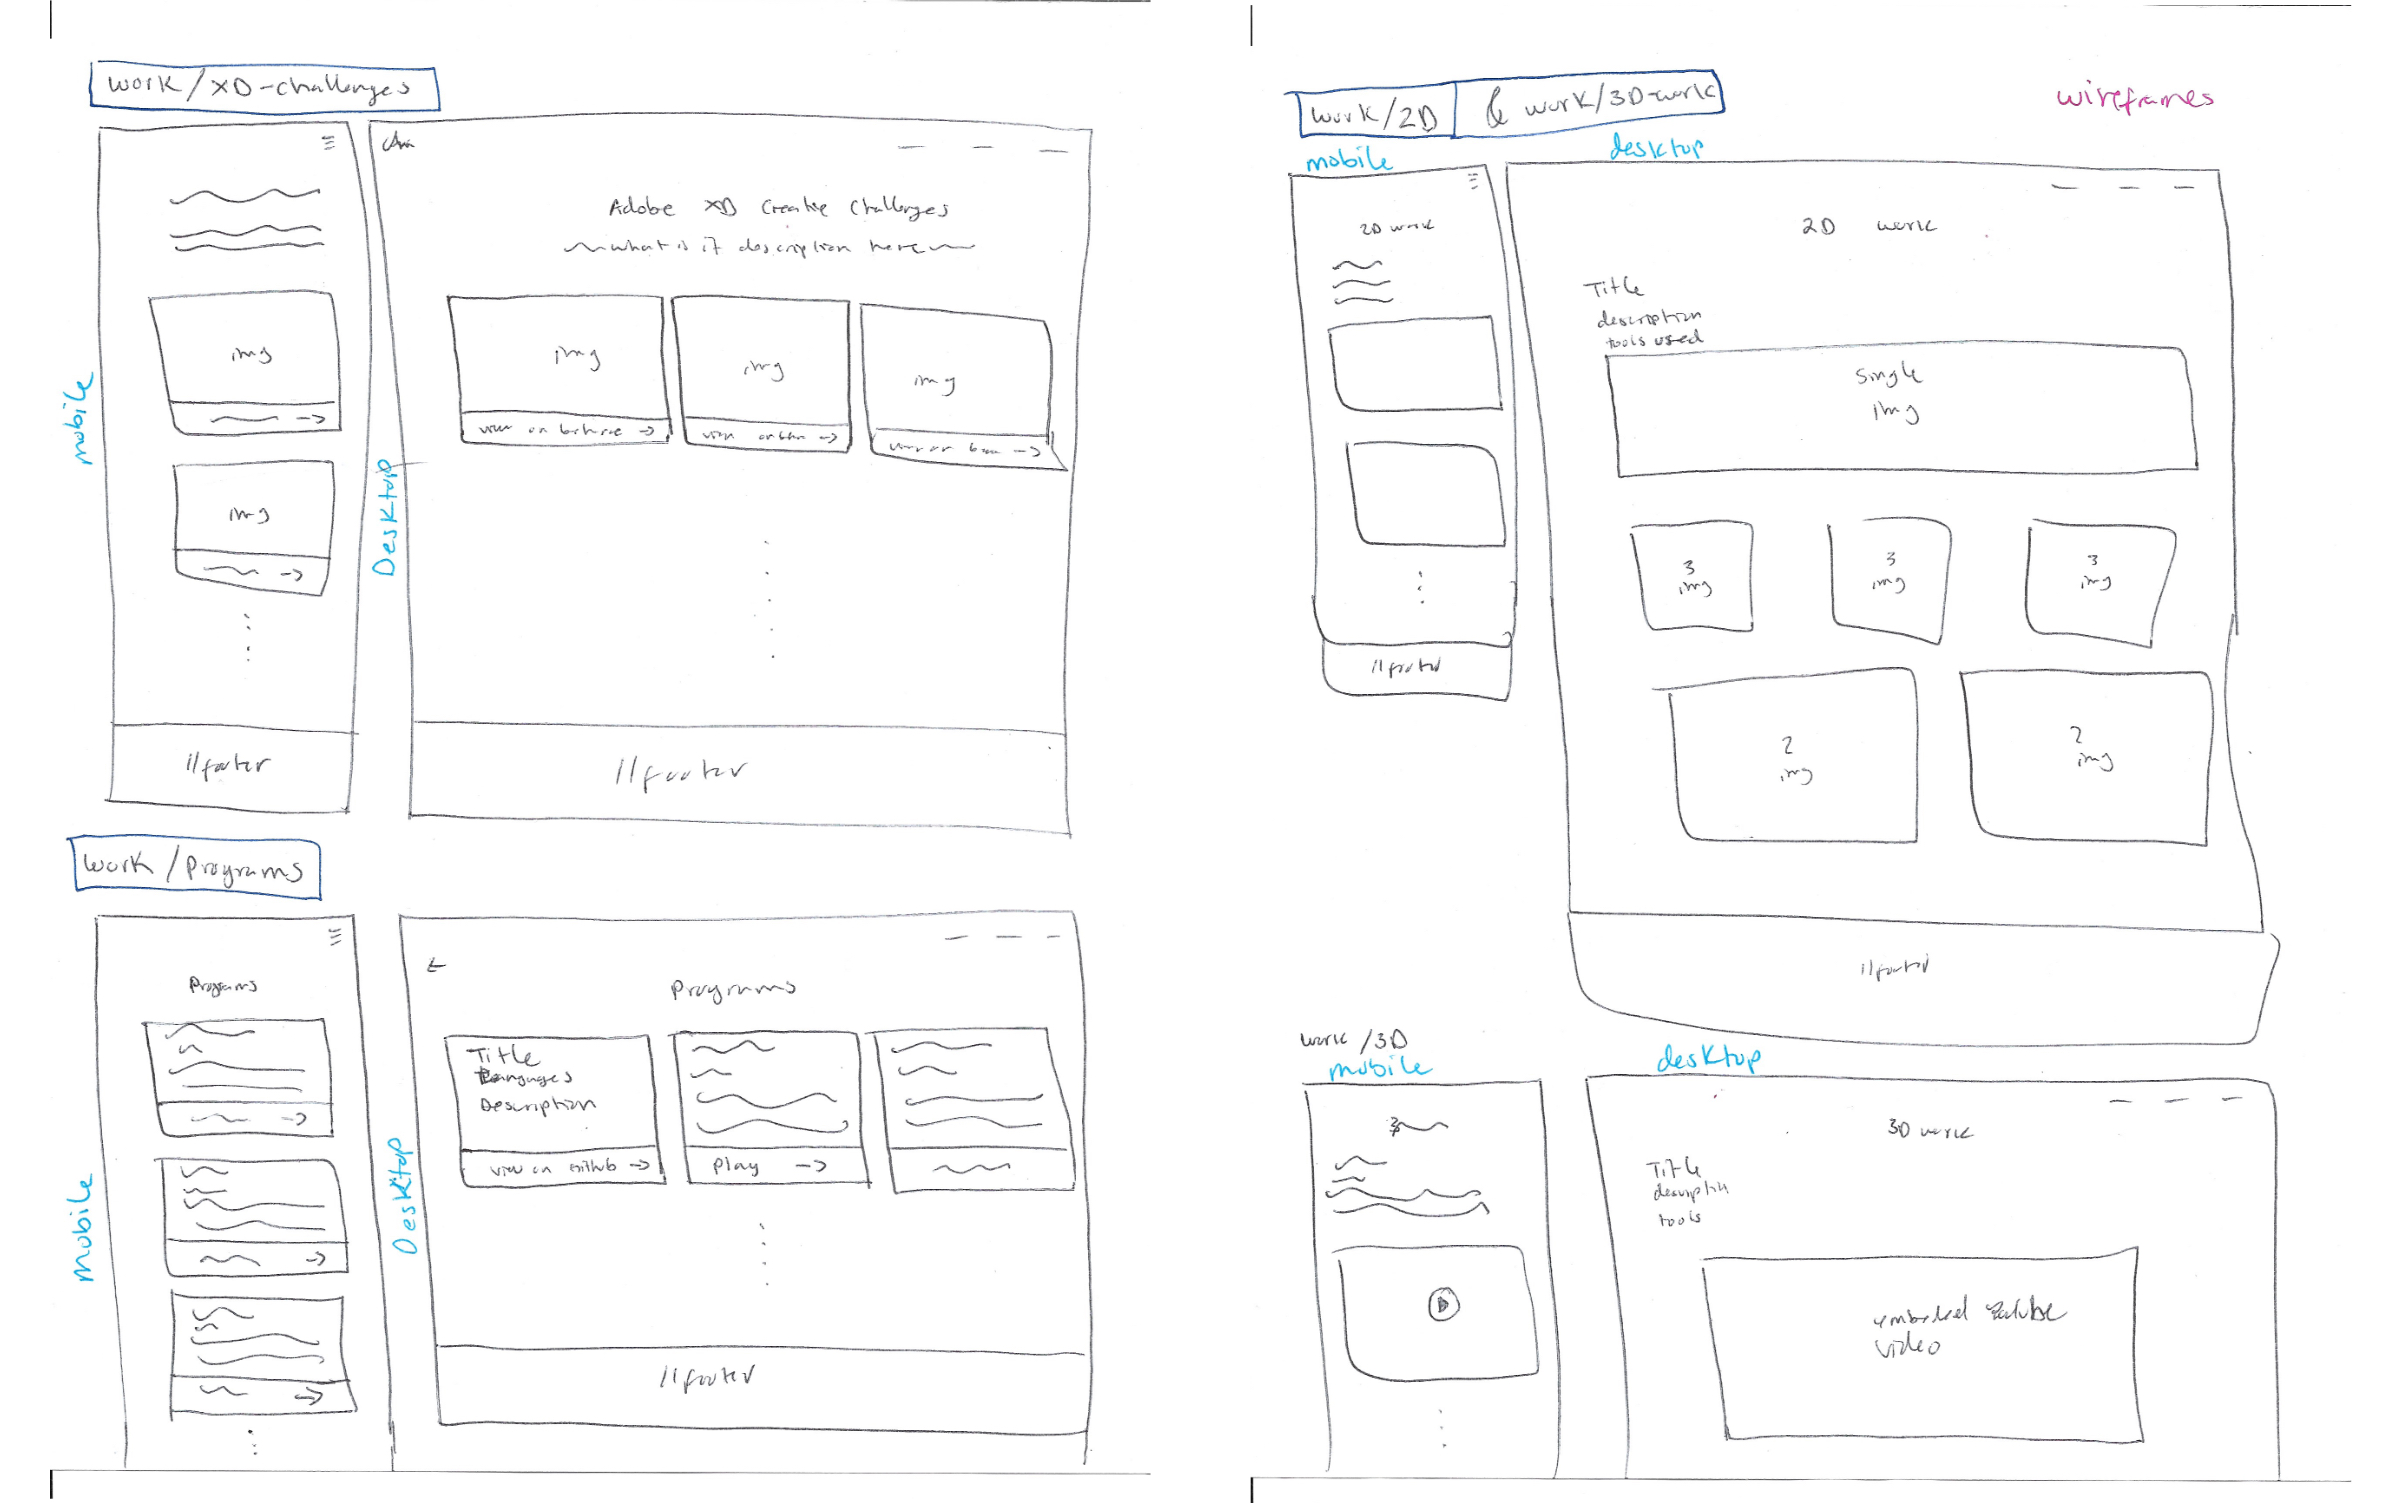 Pen and paper wireframes.